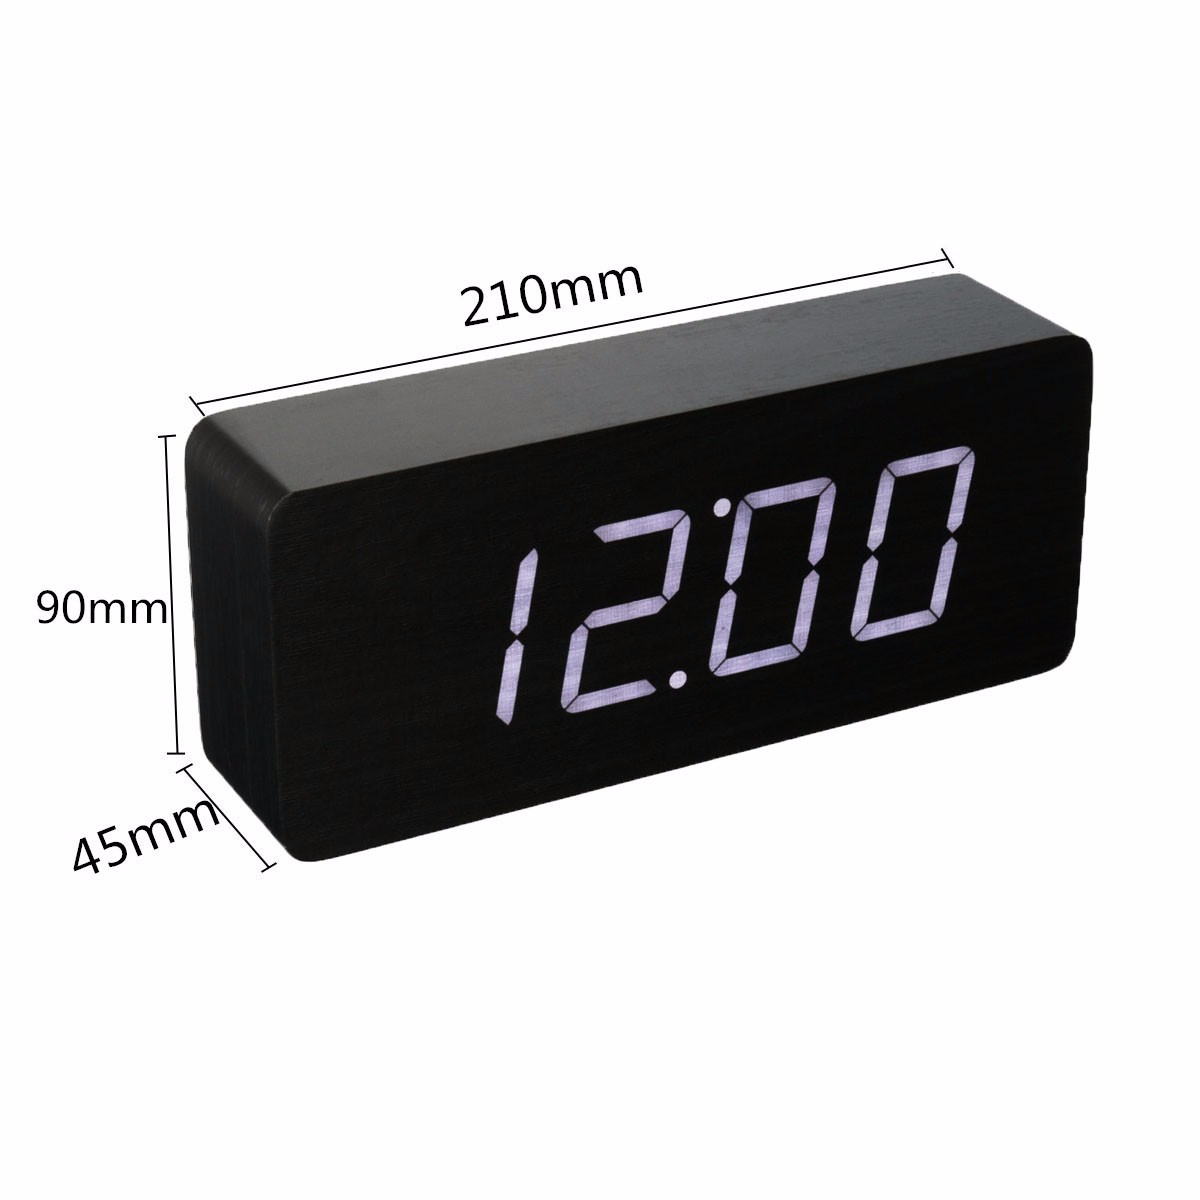 Multifunctional-Wooden-Digital-Clock-Two-Modes-Default-Display-Time-Built-in-Battery-Voice-Control-S-1891907-10